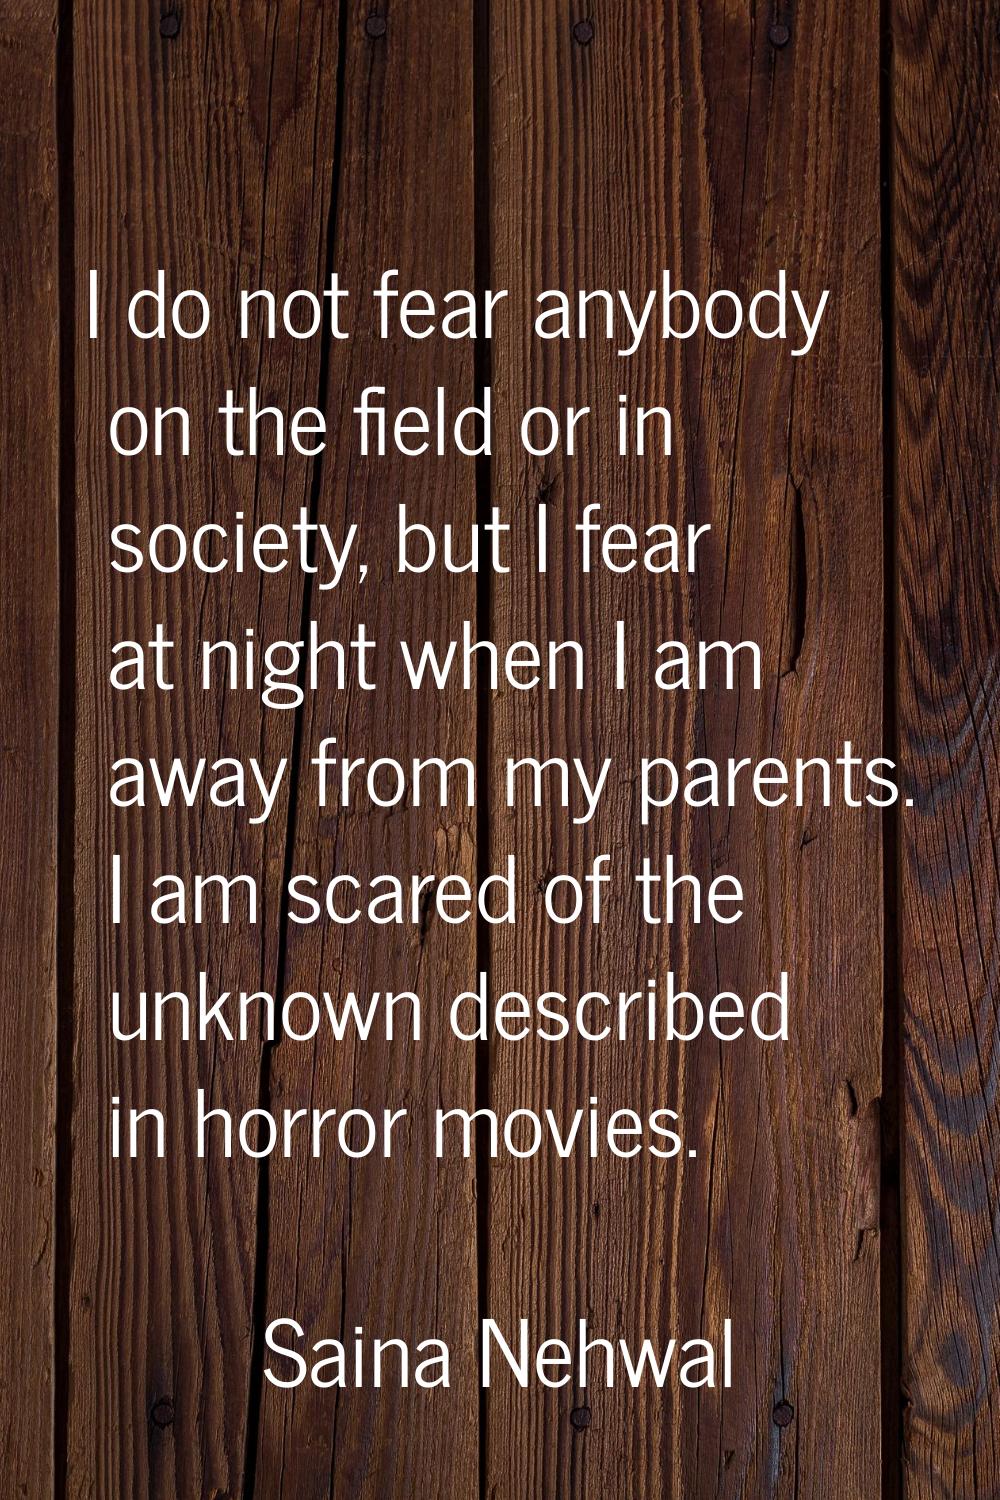 I do not fear anybody on the field or in society, but I fear at night when I am away from my parent